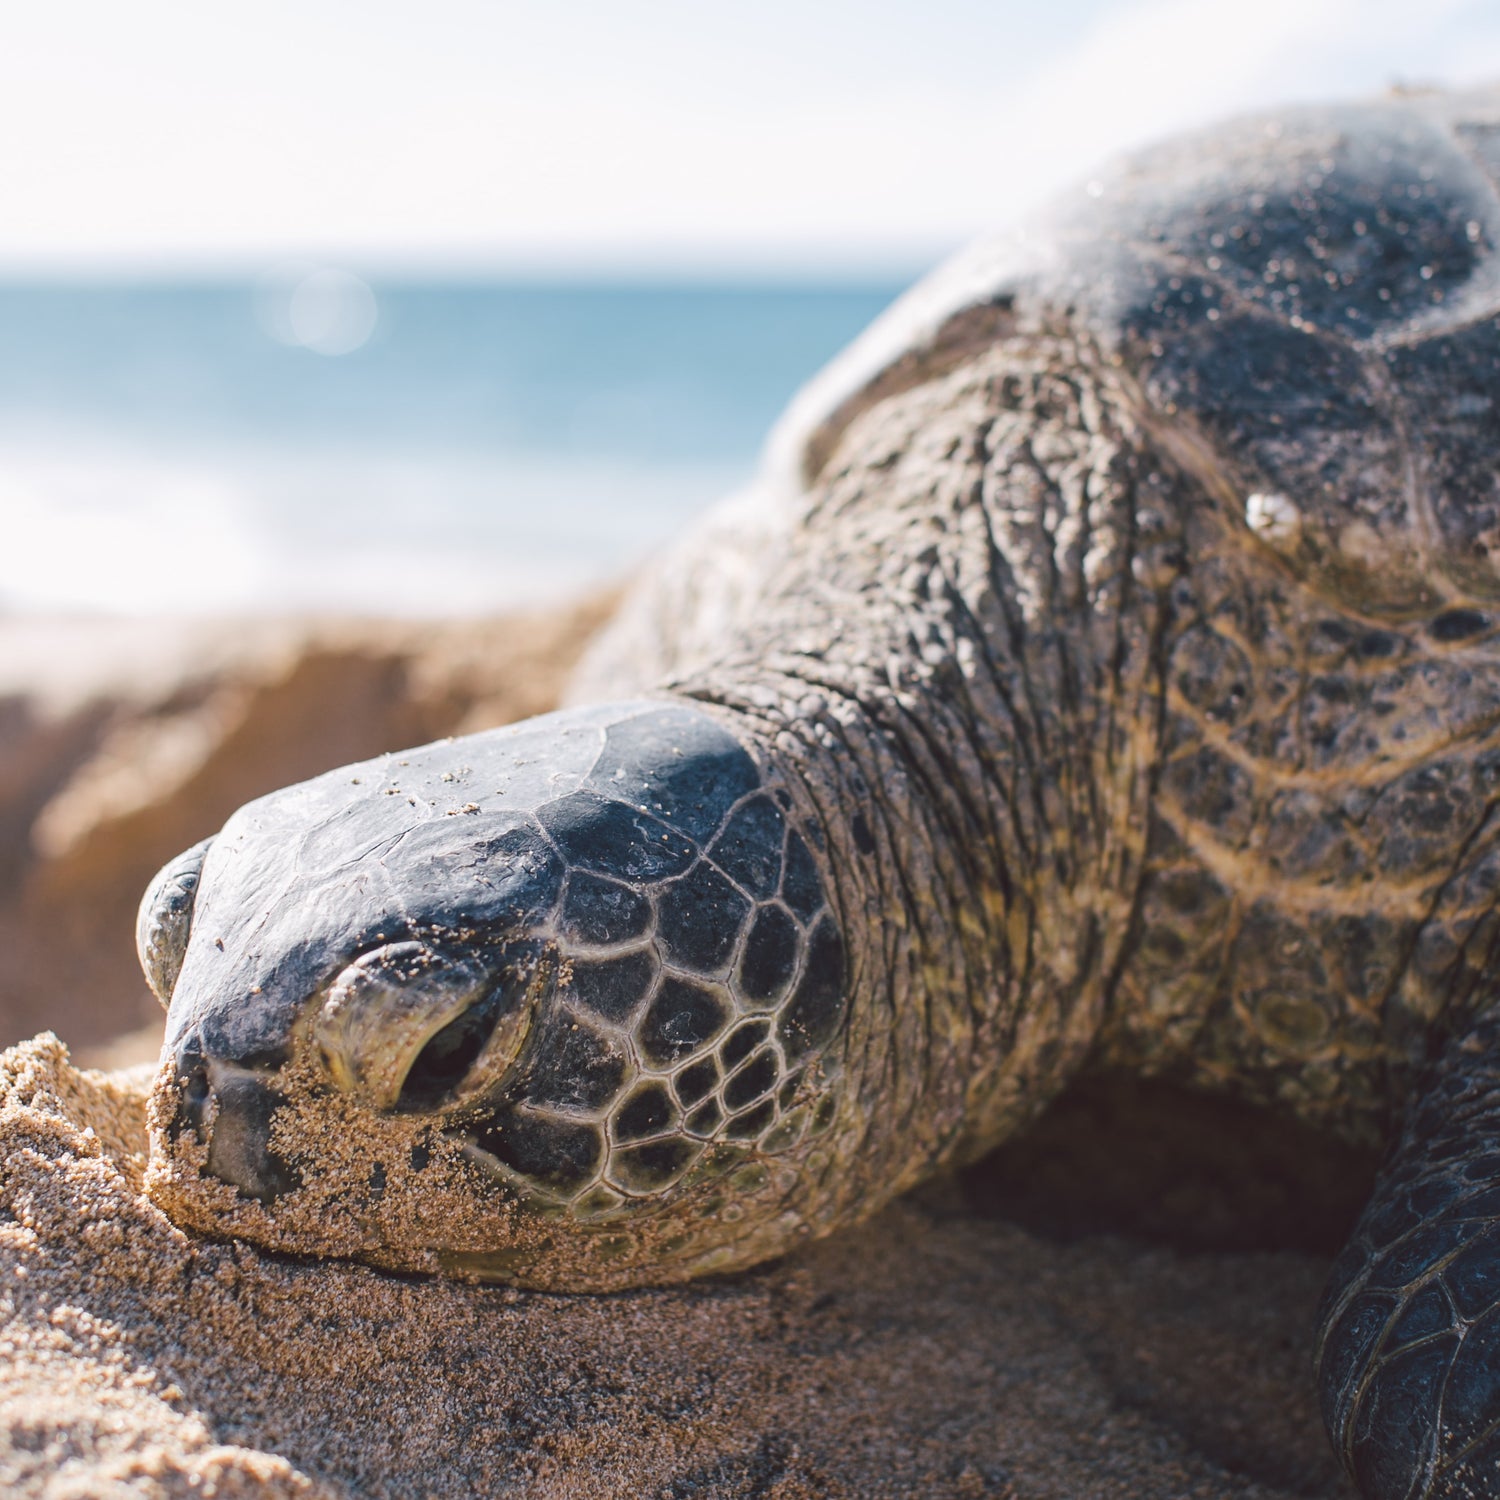 sea turtle resting on a beach in the sunlight - getpinkfit donates 10% to Sea Turtle Conservancy conservation efforts